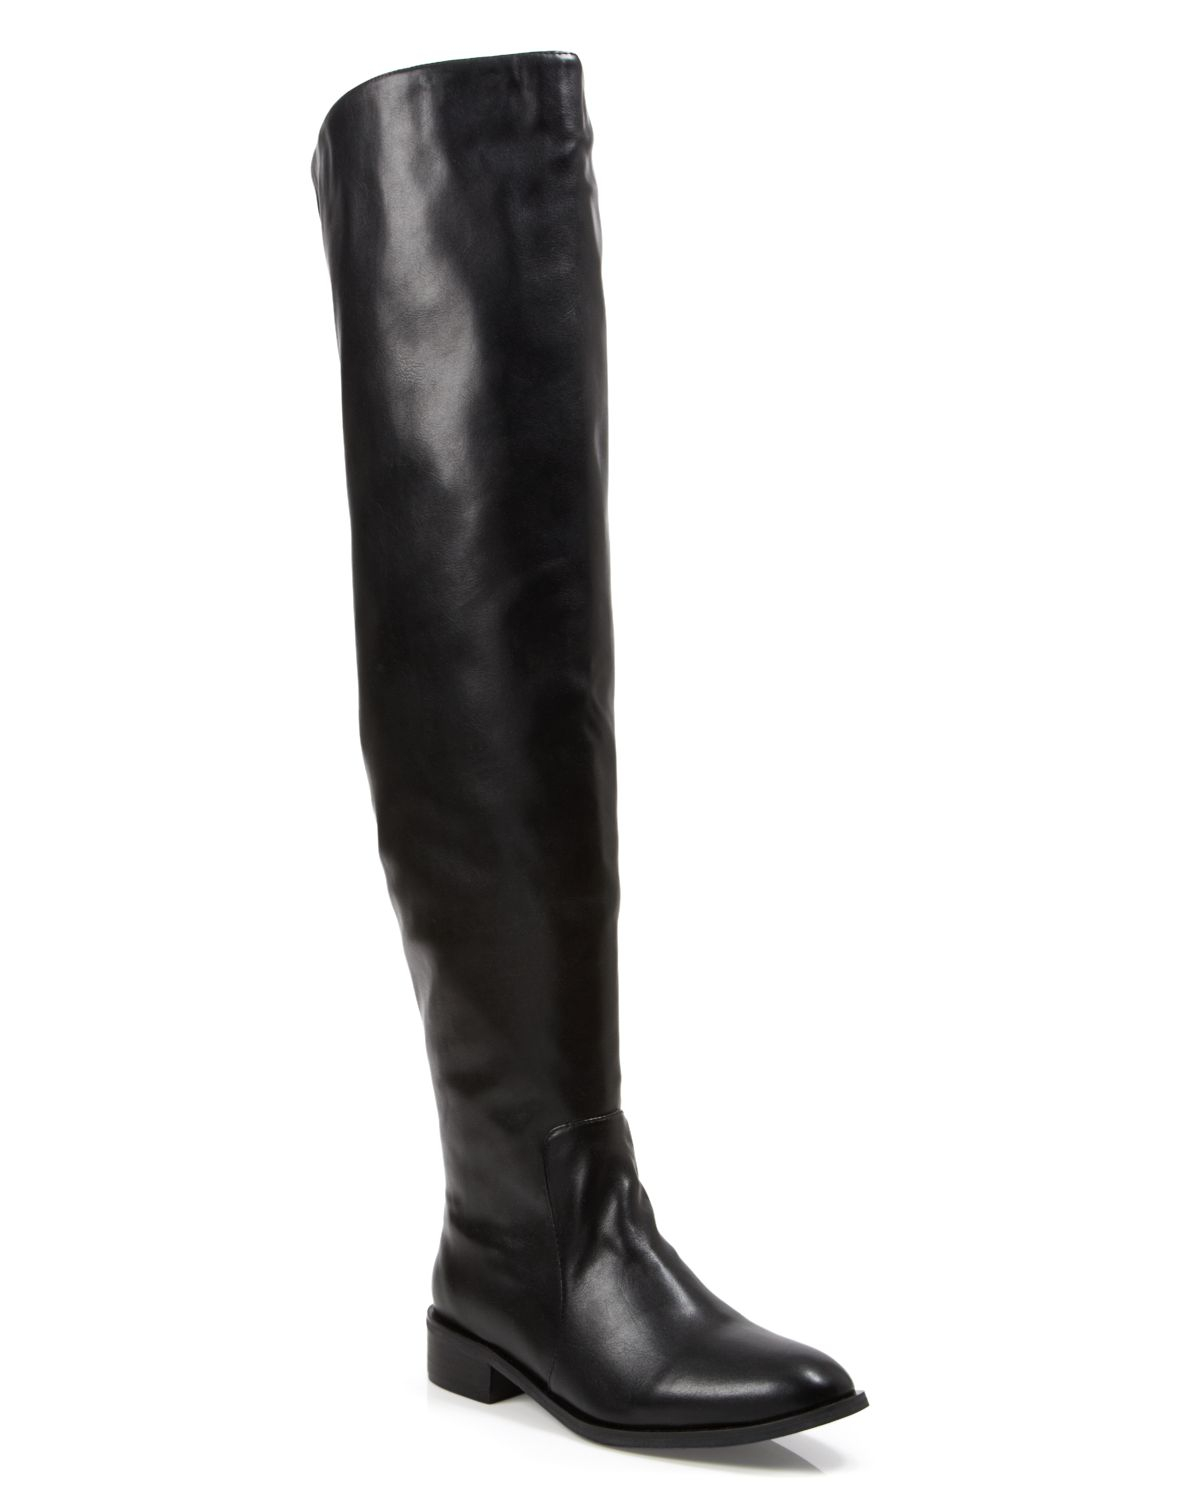 Jeffrey Campbell Leather Over The Knee Boots - Bizou in Black - Lyst